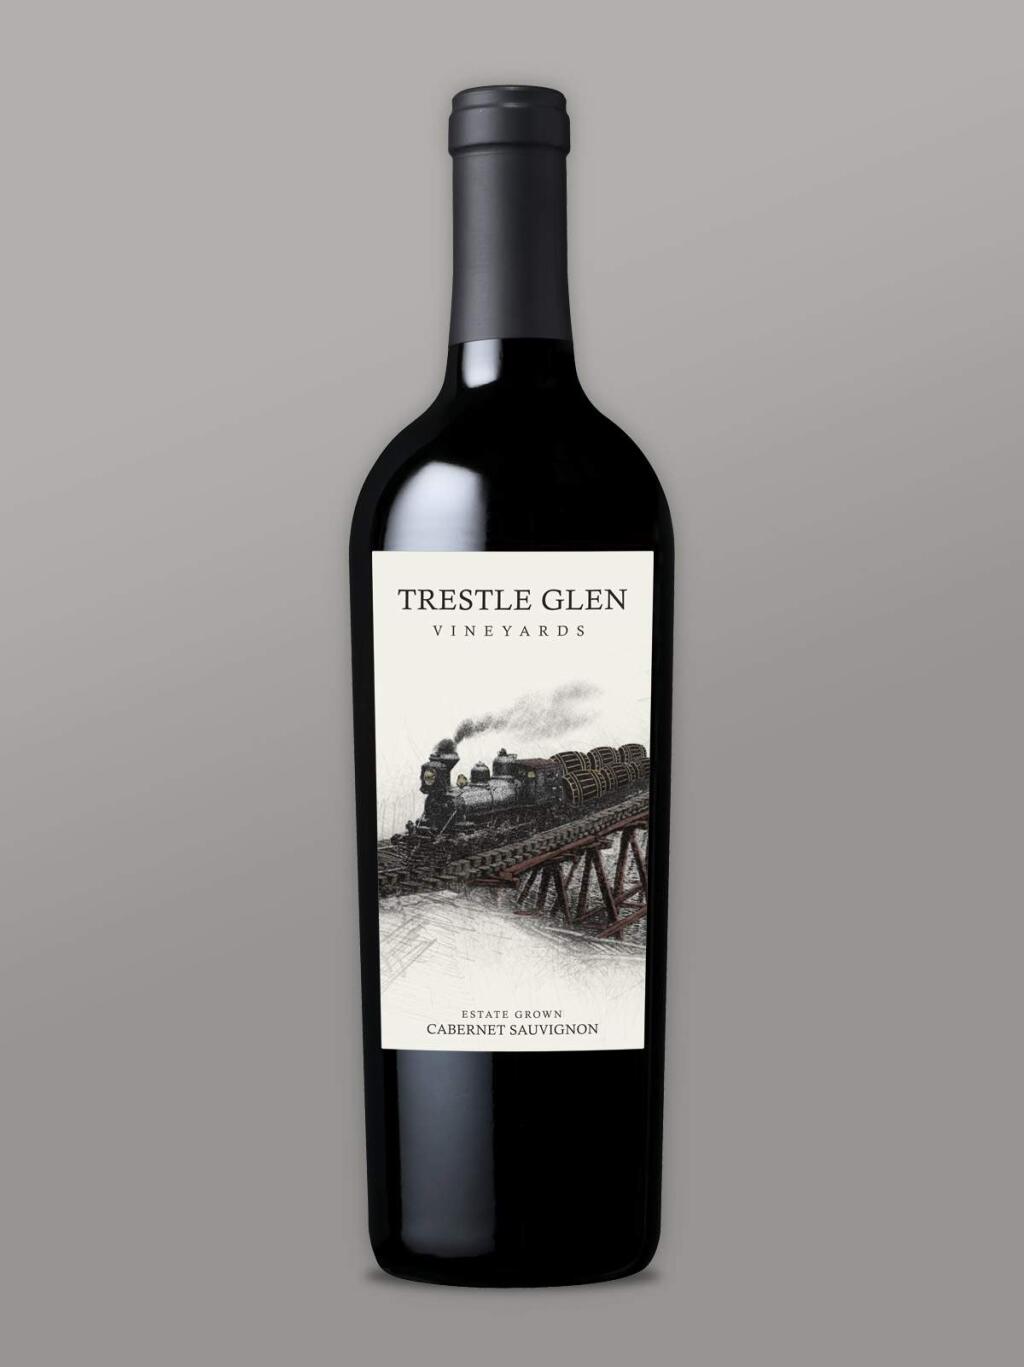 Trestle Glen's cabernet and zinfandel will be available in 2019.